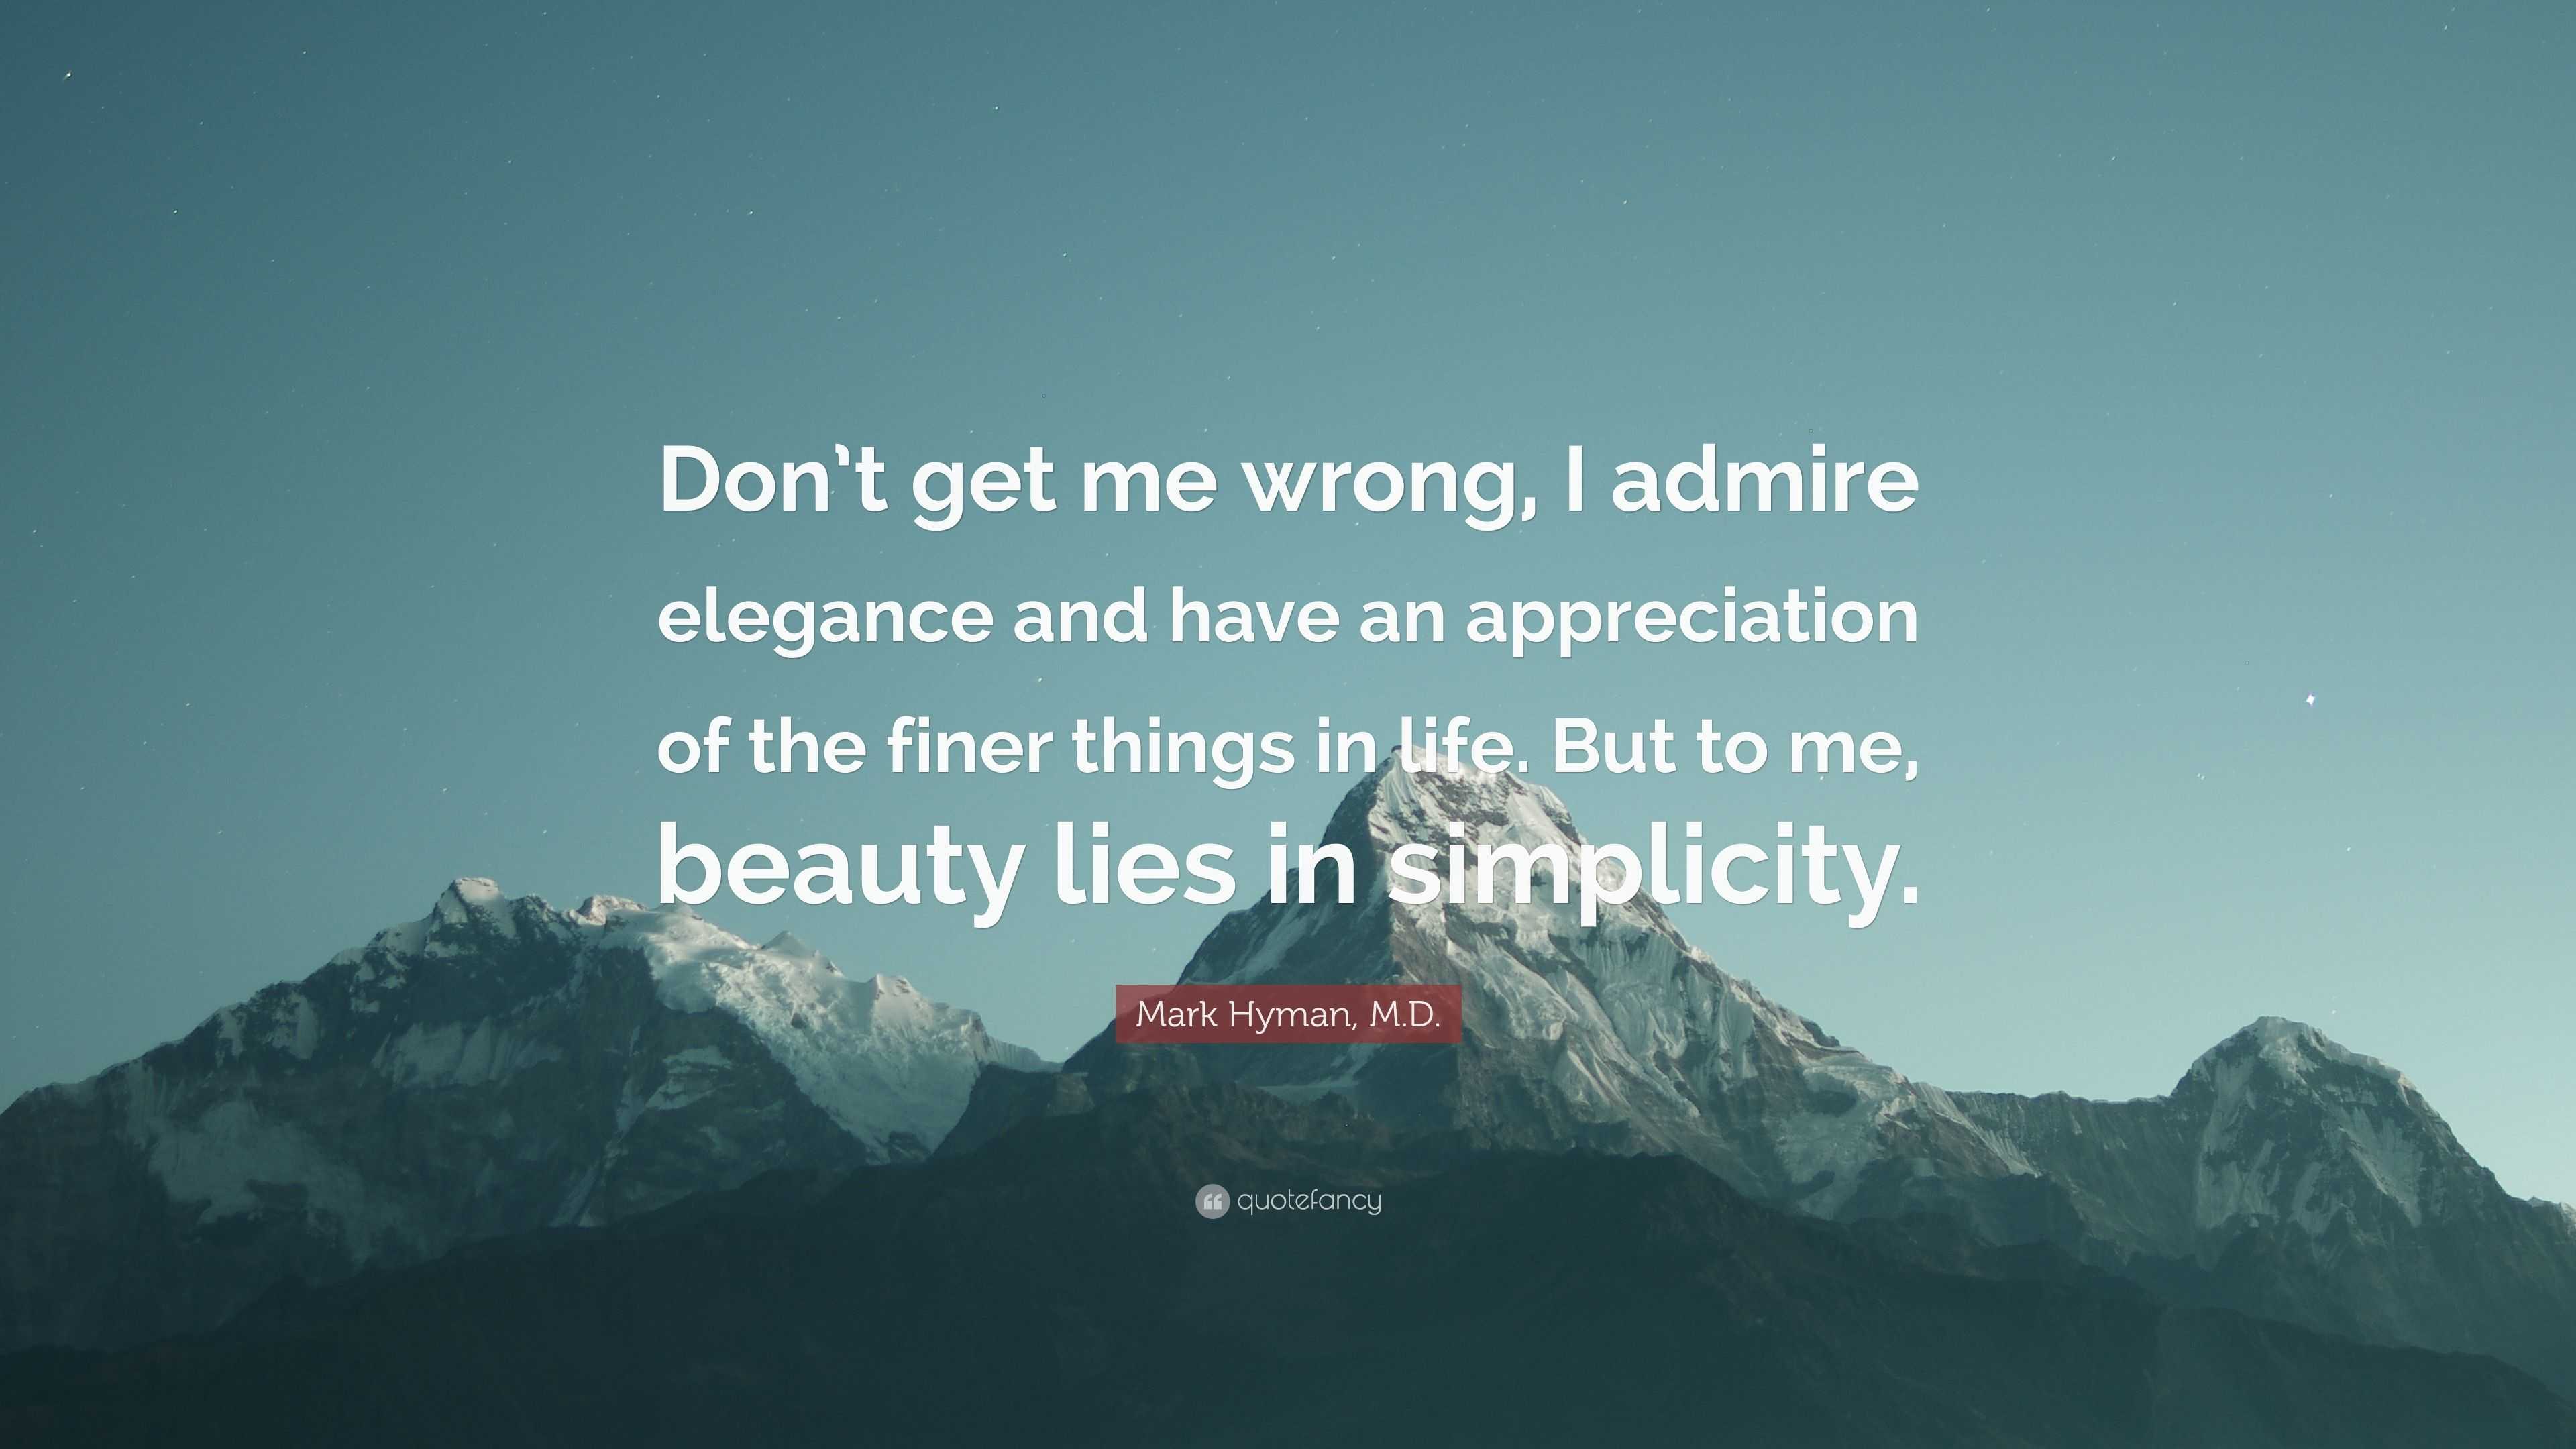 Mark Hyman M D Quote “Don t me wrong I admire